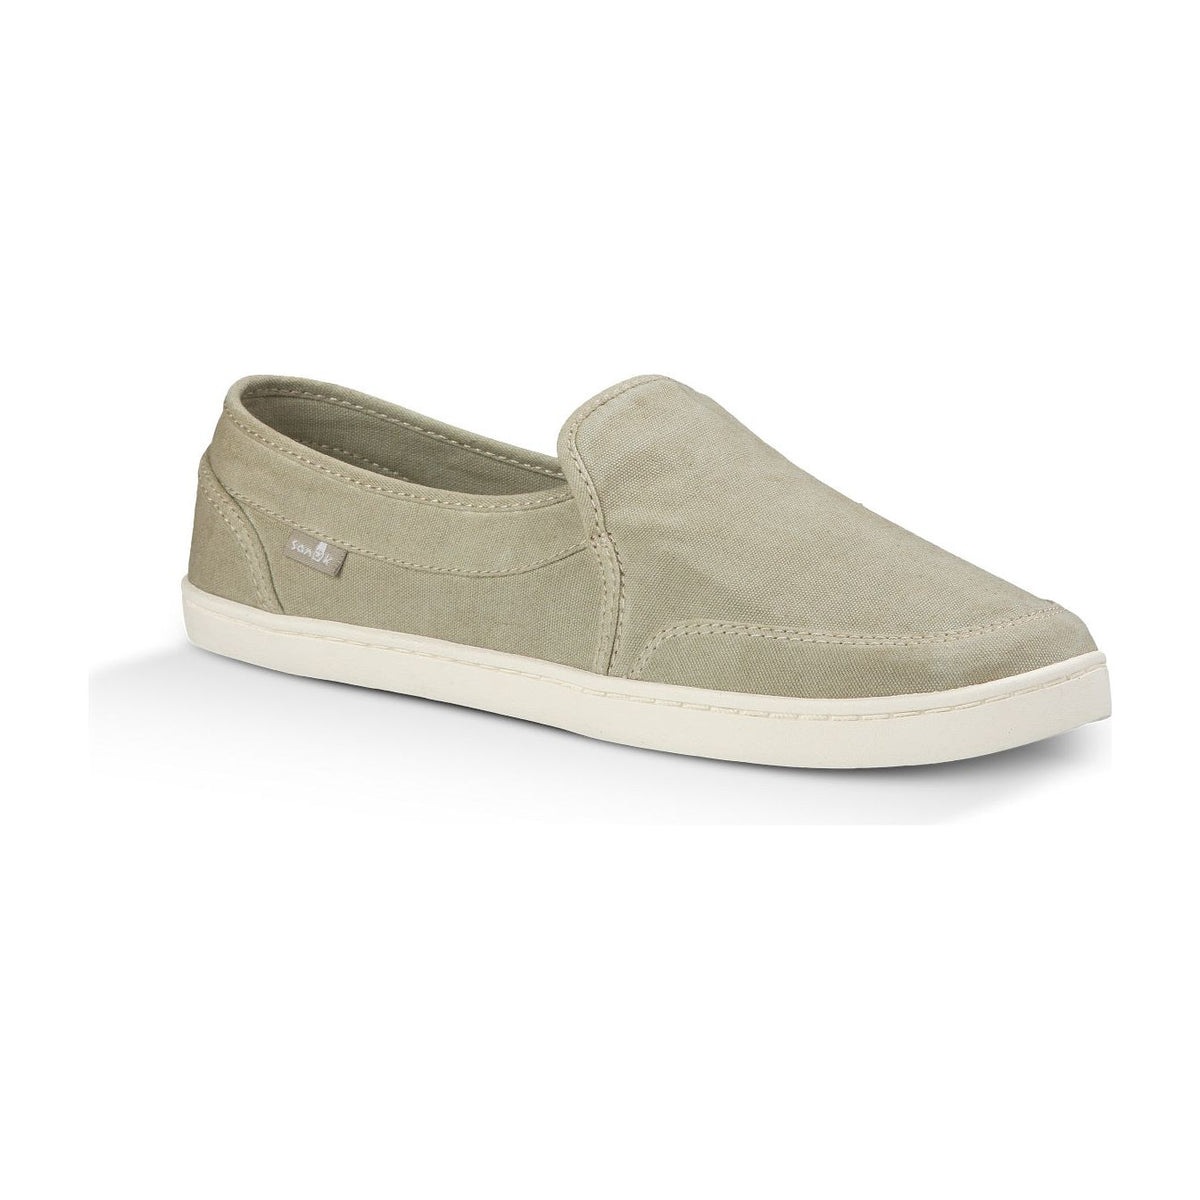 Sanuk Women's Pair O Dice Slip On Sneakers - Ourland Outdoor